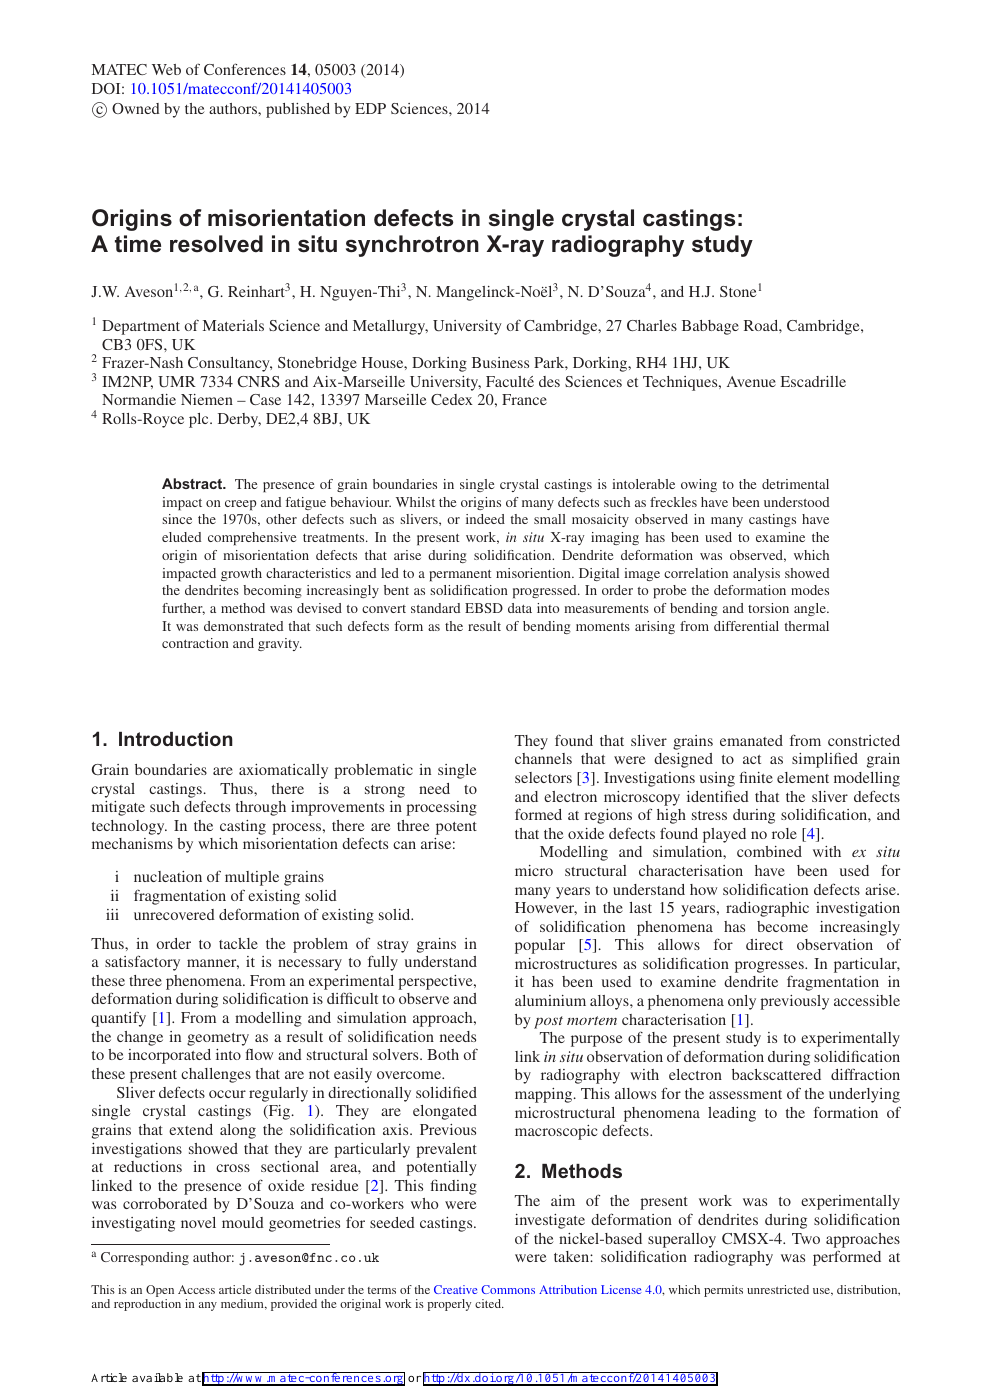 Origins Of Misorientation Defects In Single Crystal Castings A Time Resolved In Situ Synchrotron X Ray Radiography Study Topic Of Research Paper In Materials Engineering Download Scholarly Article Pdf And Read For